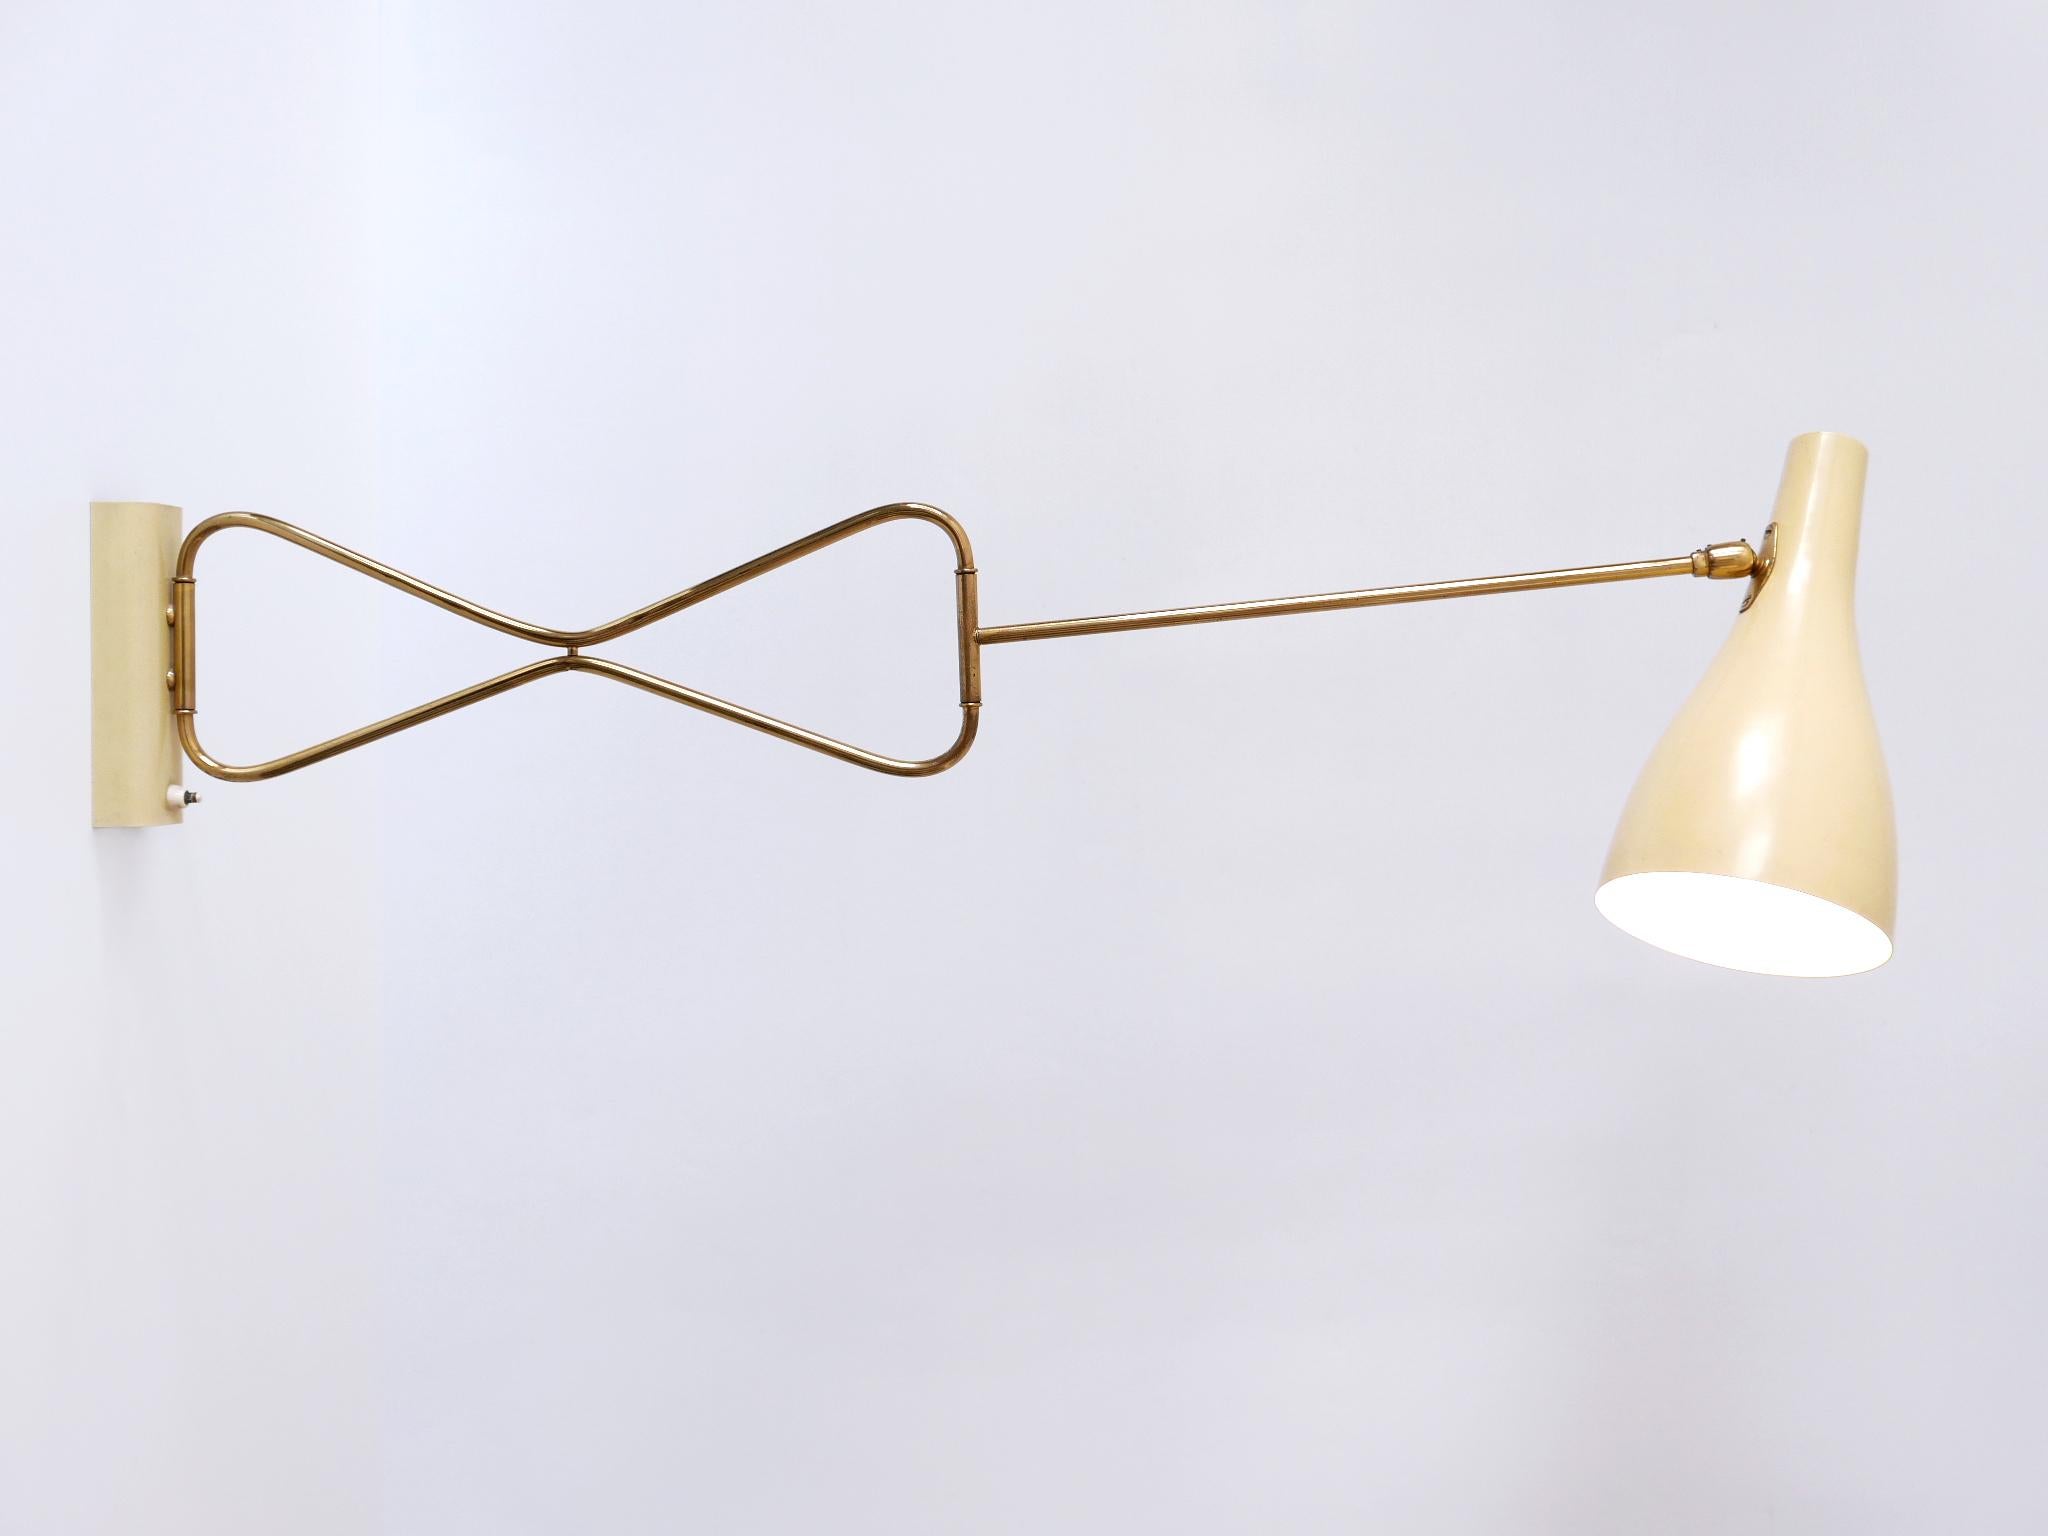 Extremely rare and elegant Mid-Century Modern articulated wall lamp. Model No:  '9590/28'. Designed & manufactured by Gebrüder Cosack, Germany, 1950s. 

Executed in brass and aluminium, the wall lamp is executed with  1 x E27 / E27 Edison screw fit